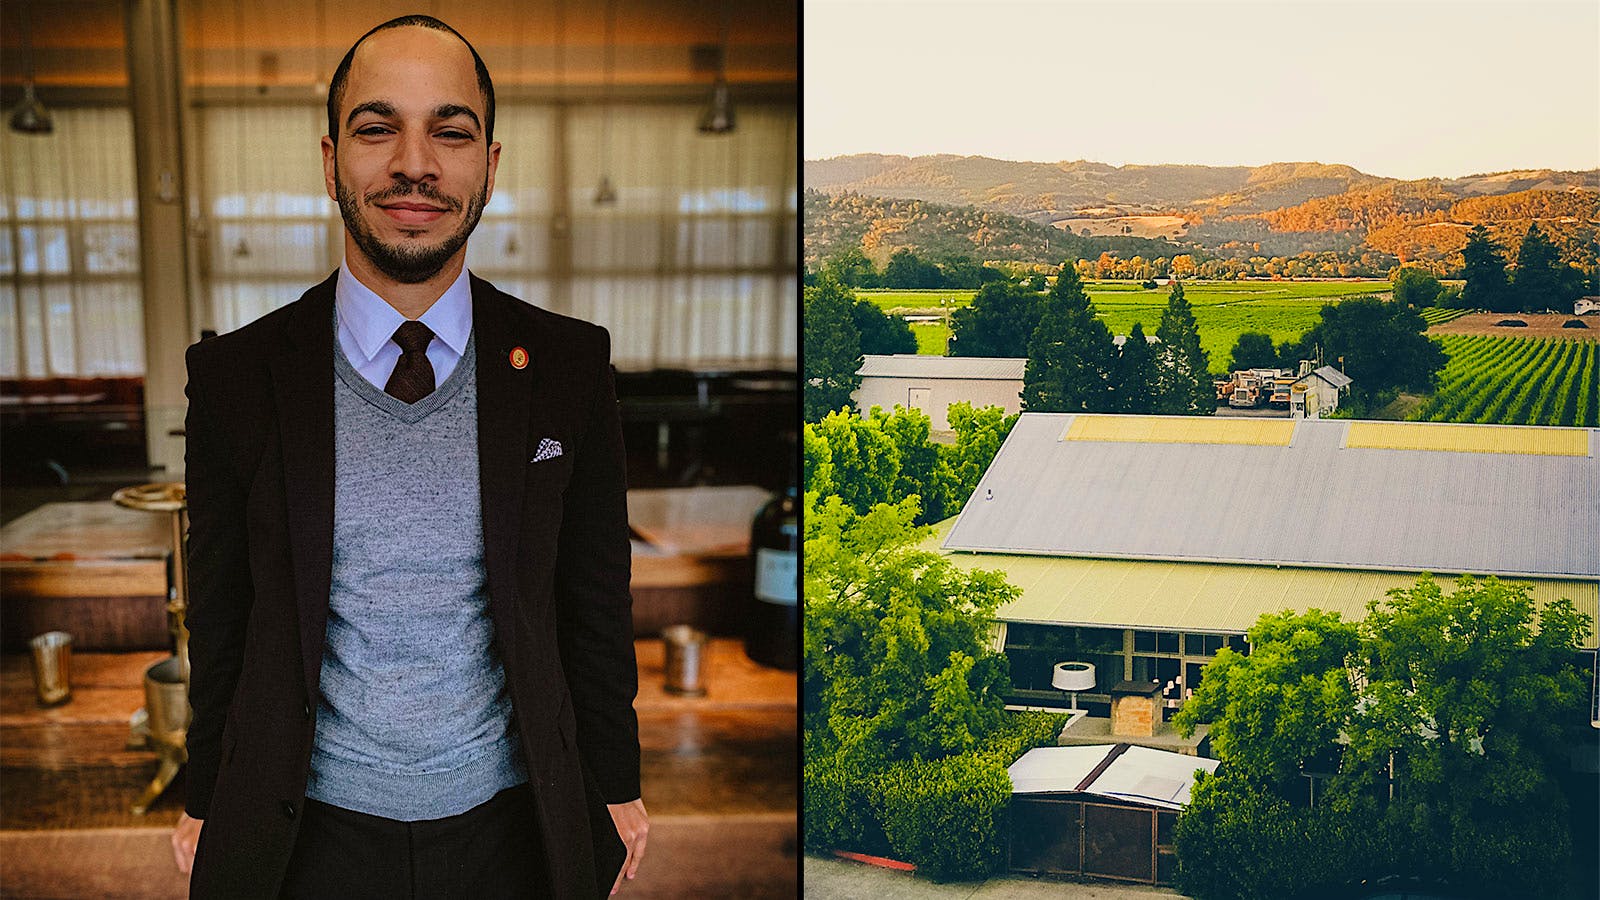 Vincent Morrow: A Napa Wine Director with a Diversity Mission